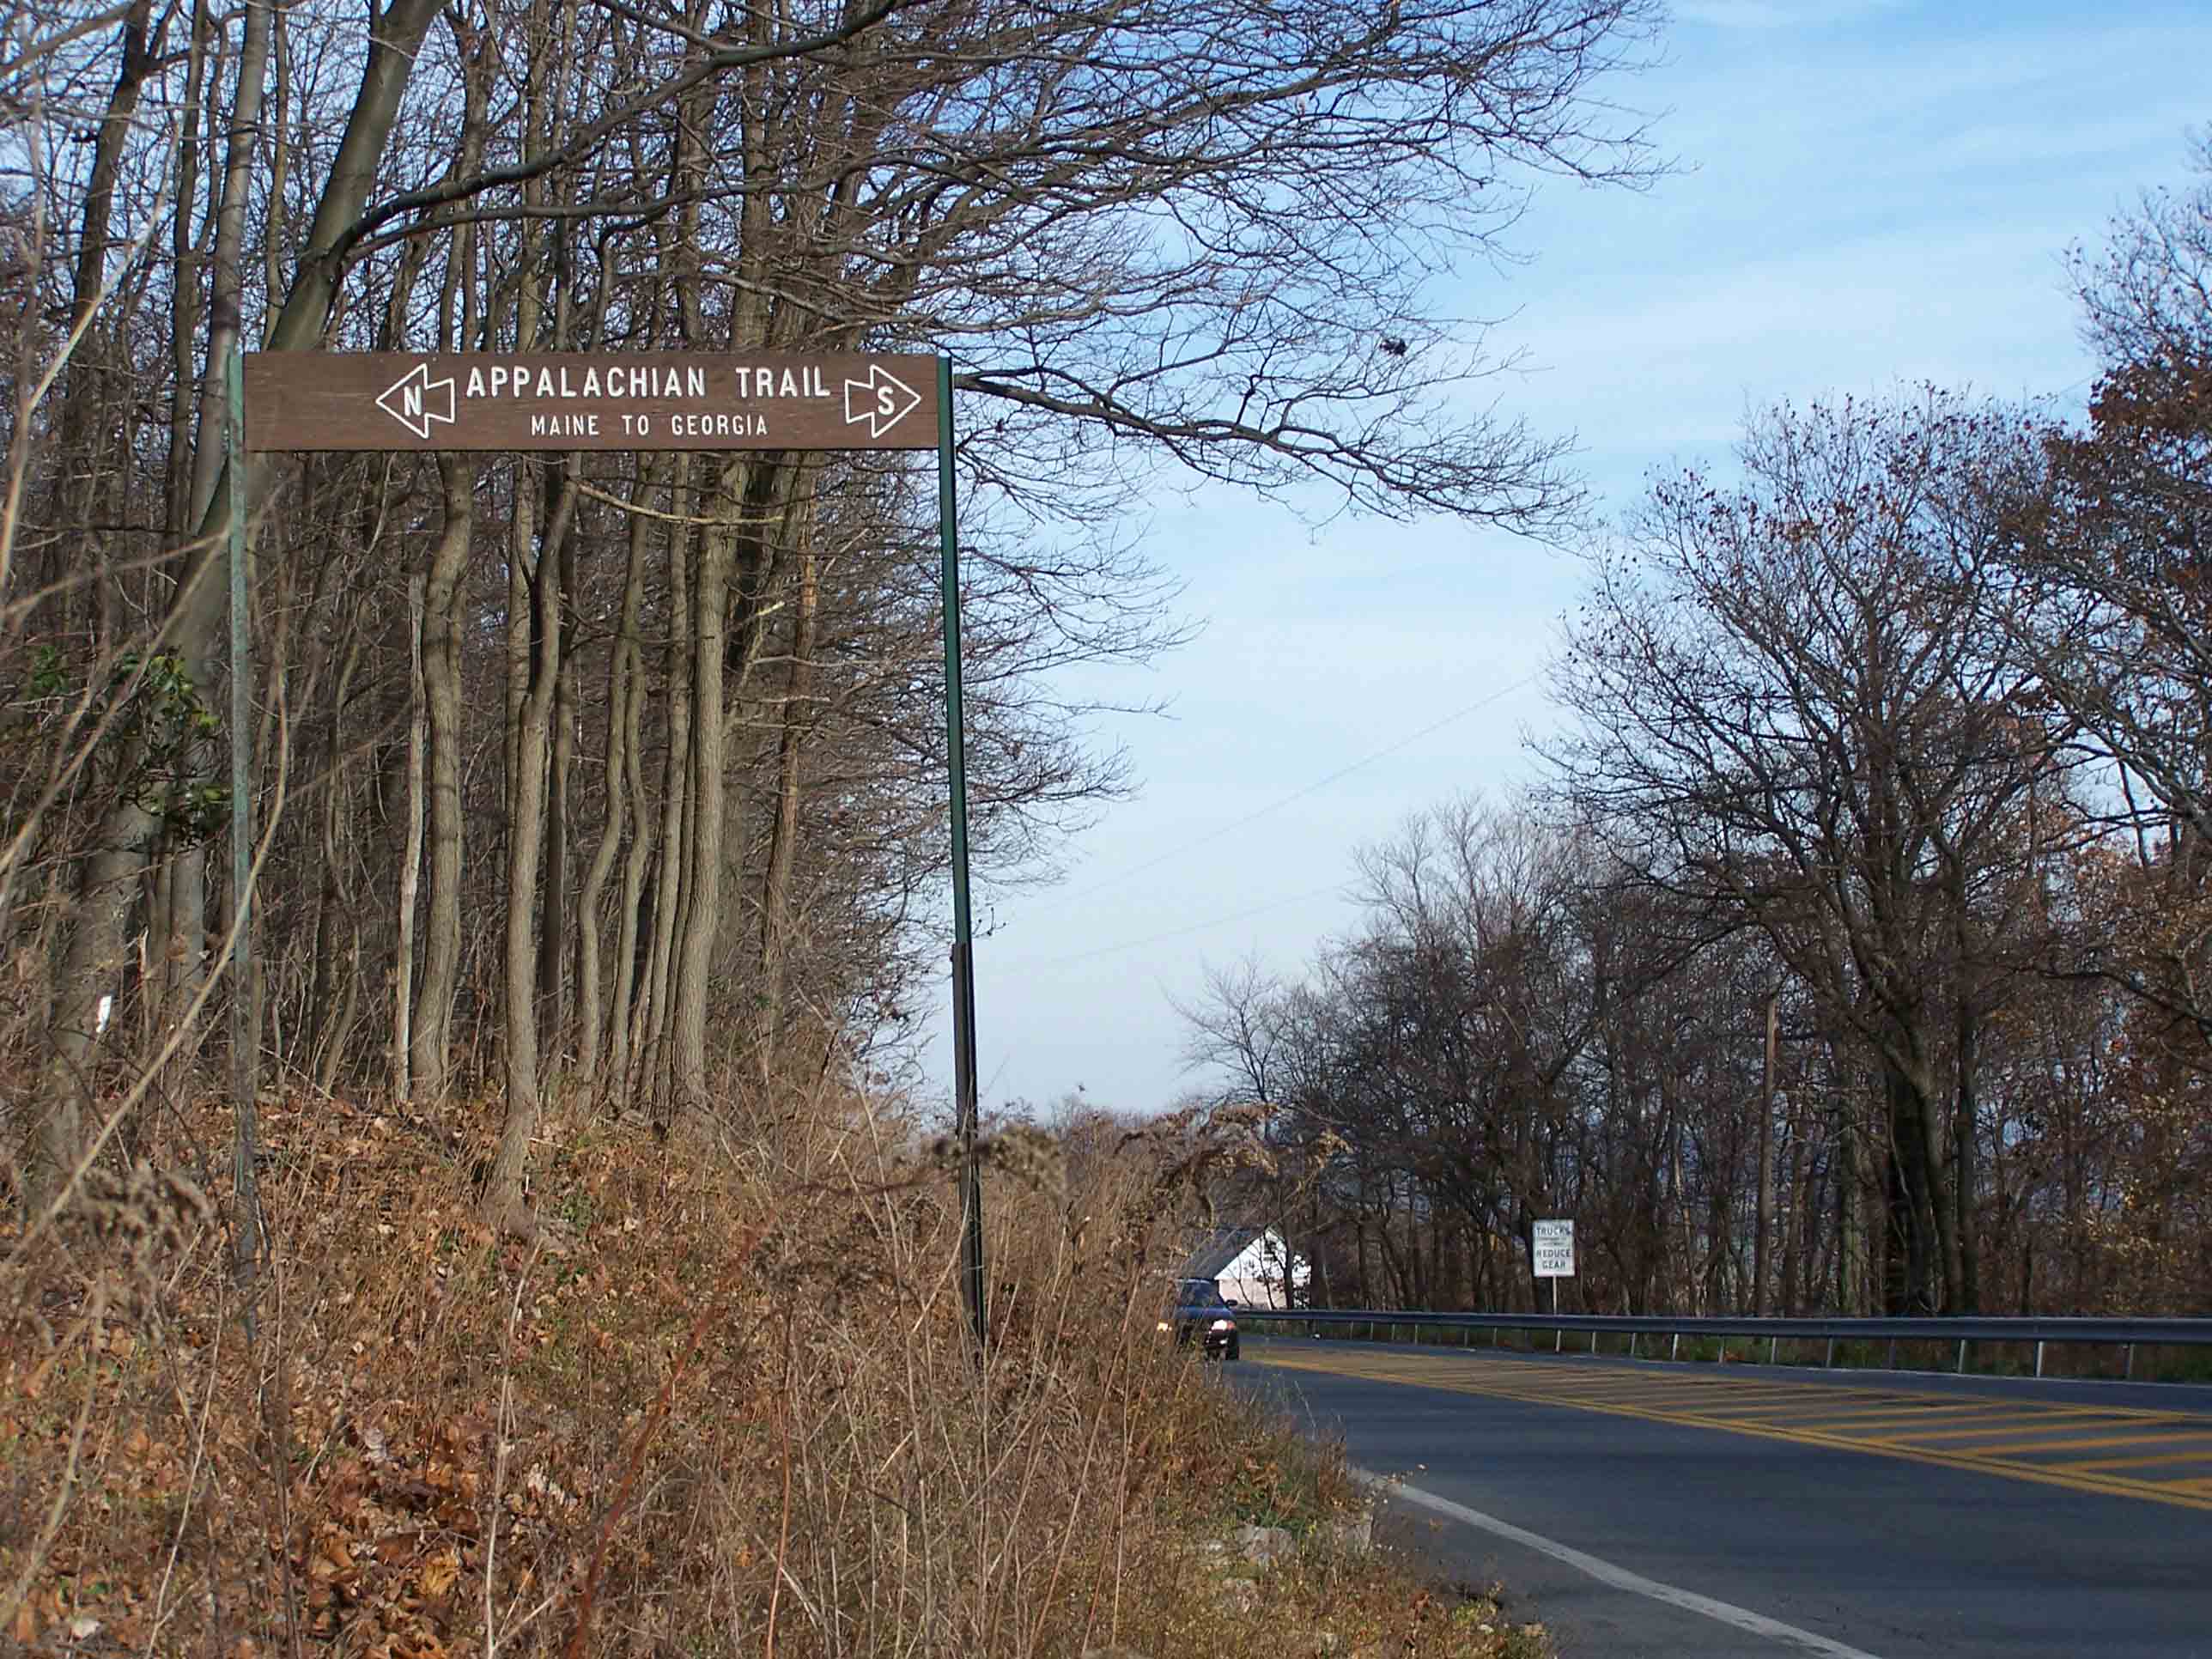 PA 309 trail head going north. Courtesy at@rohland.org